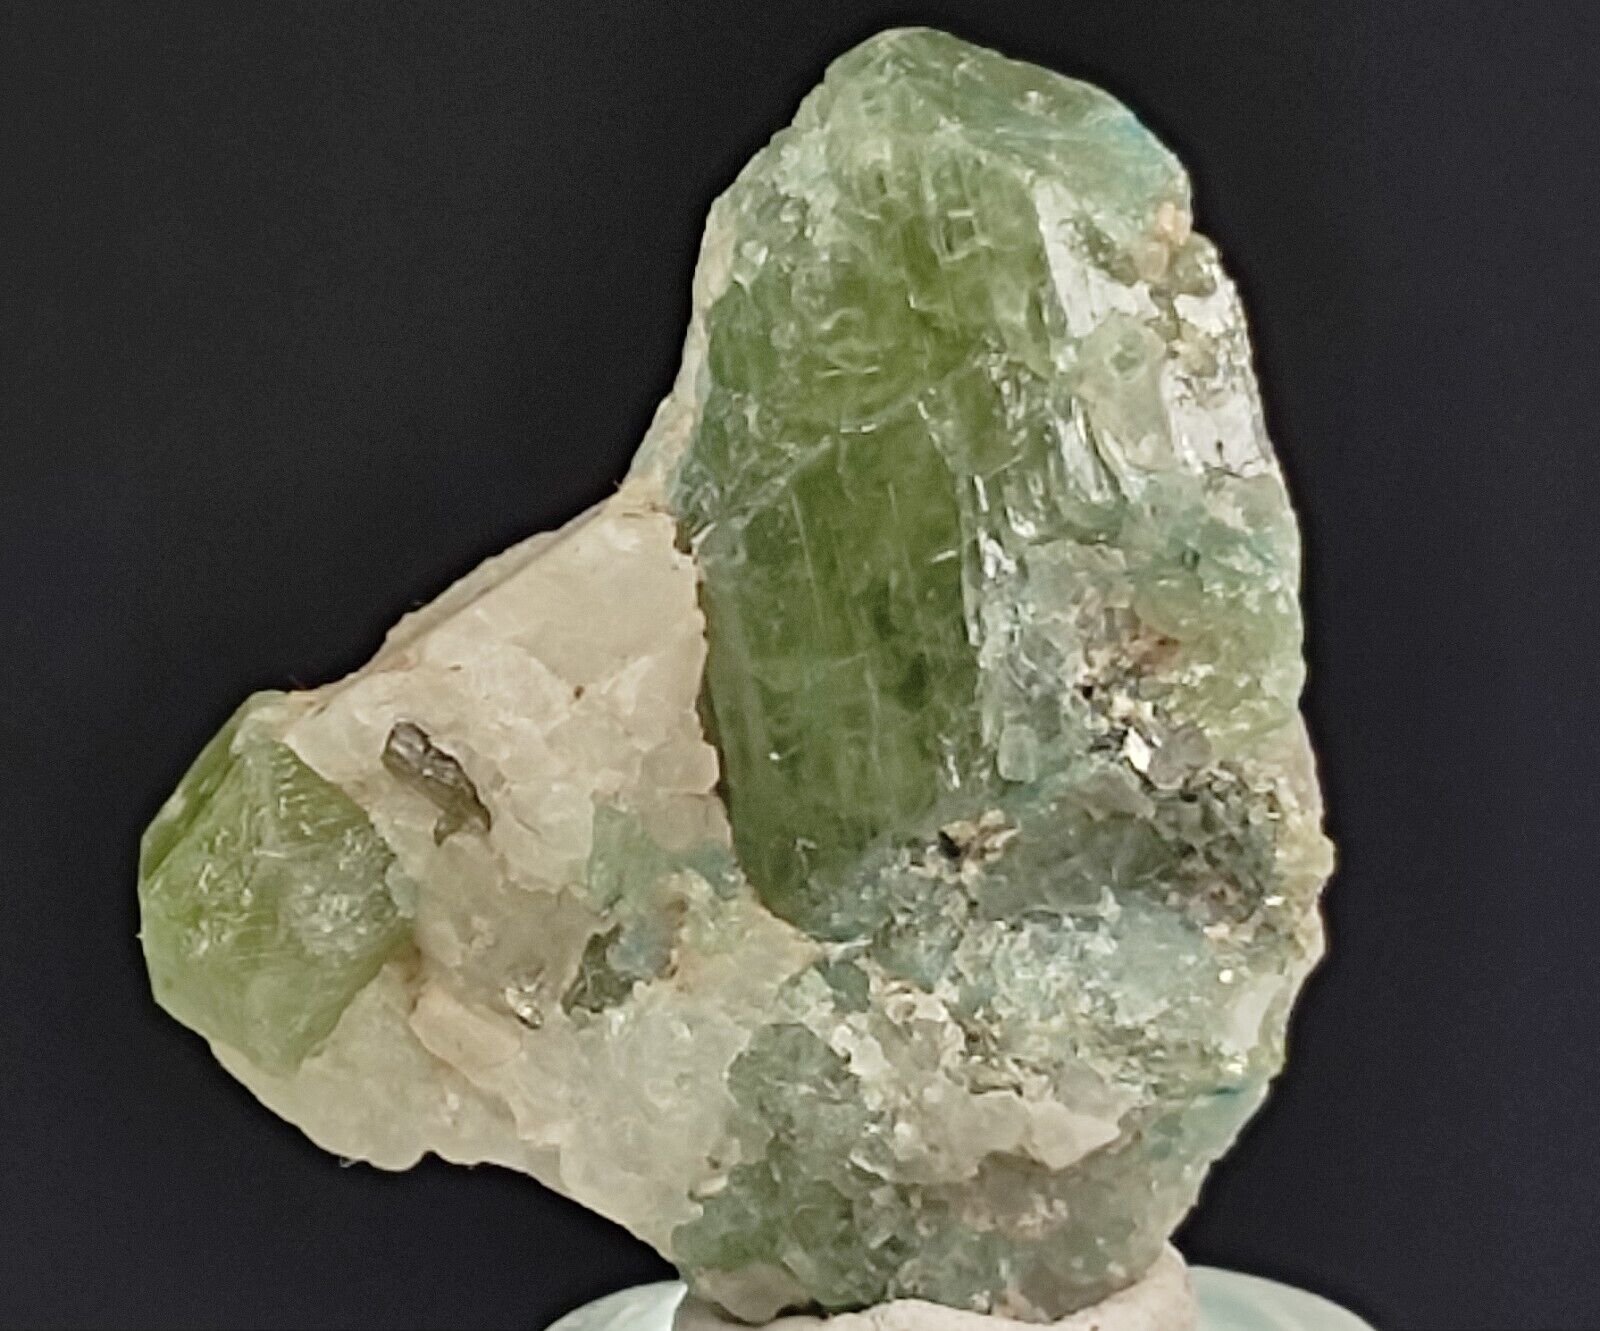 Natural Diopside Crystal with Mica on Matrix (CG 624) Daylight Photos